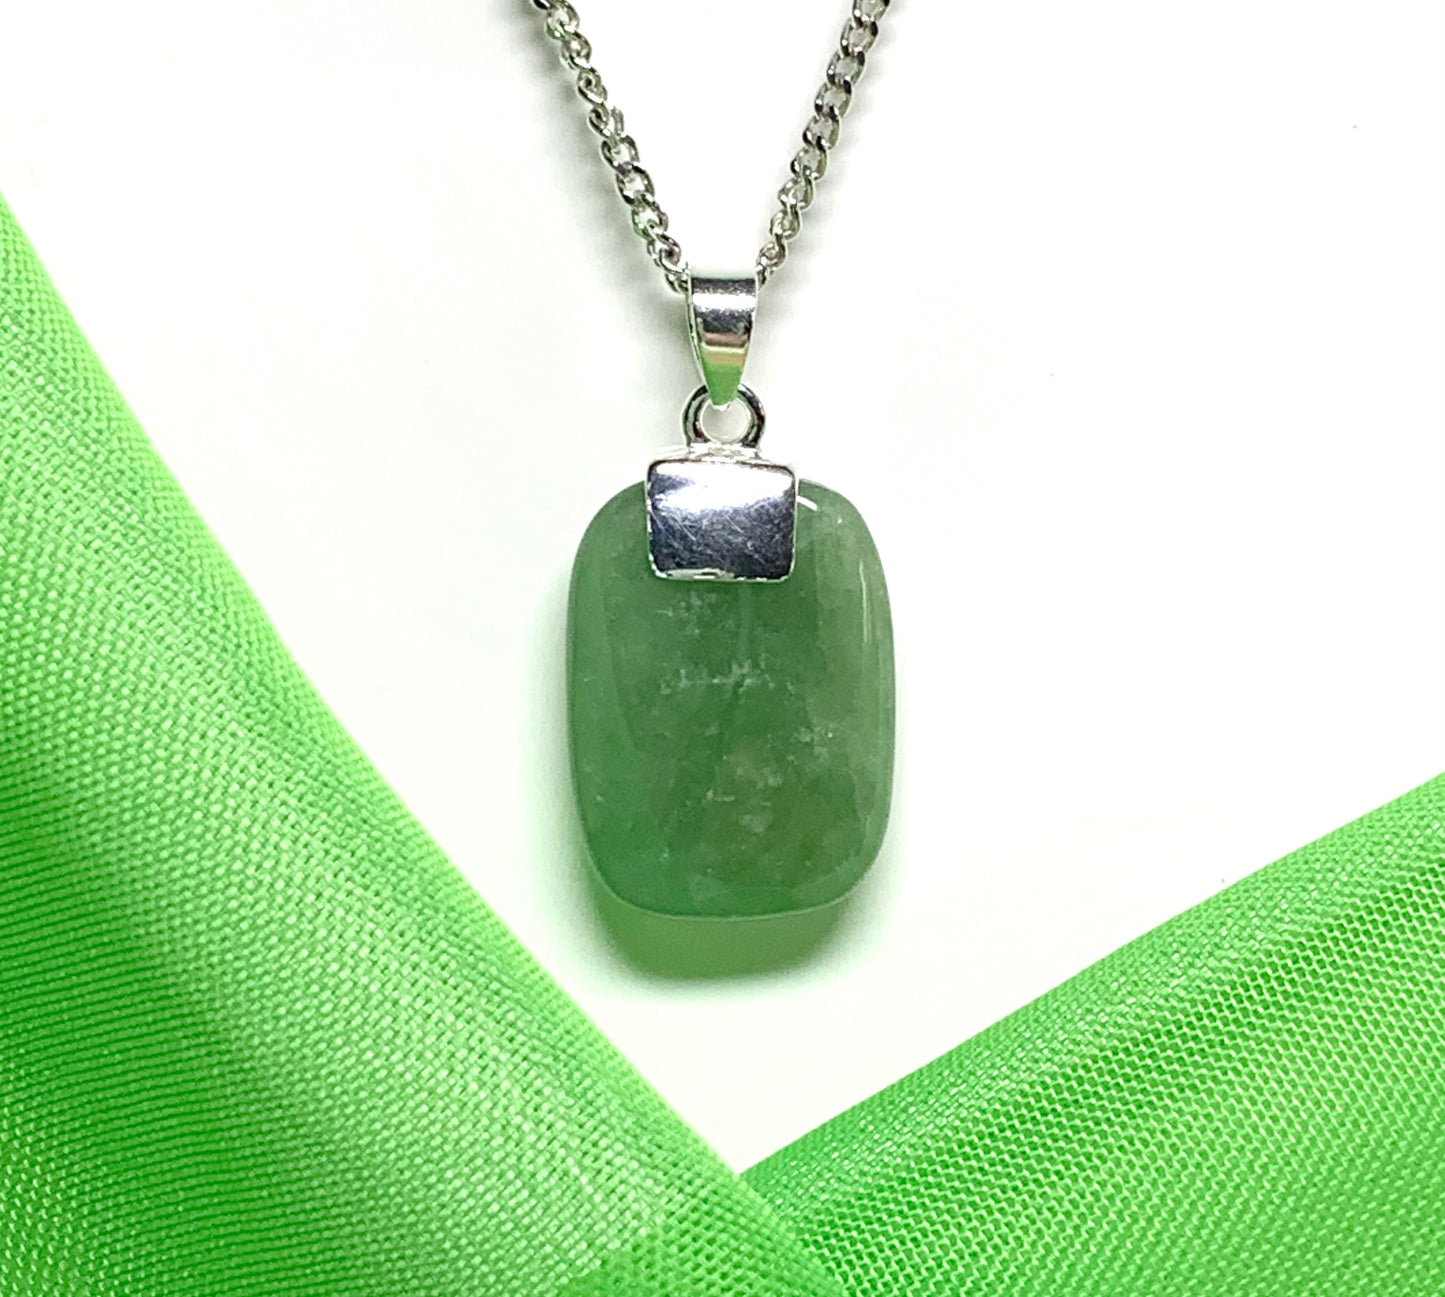 Real green jade necklace cushion shaped silver